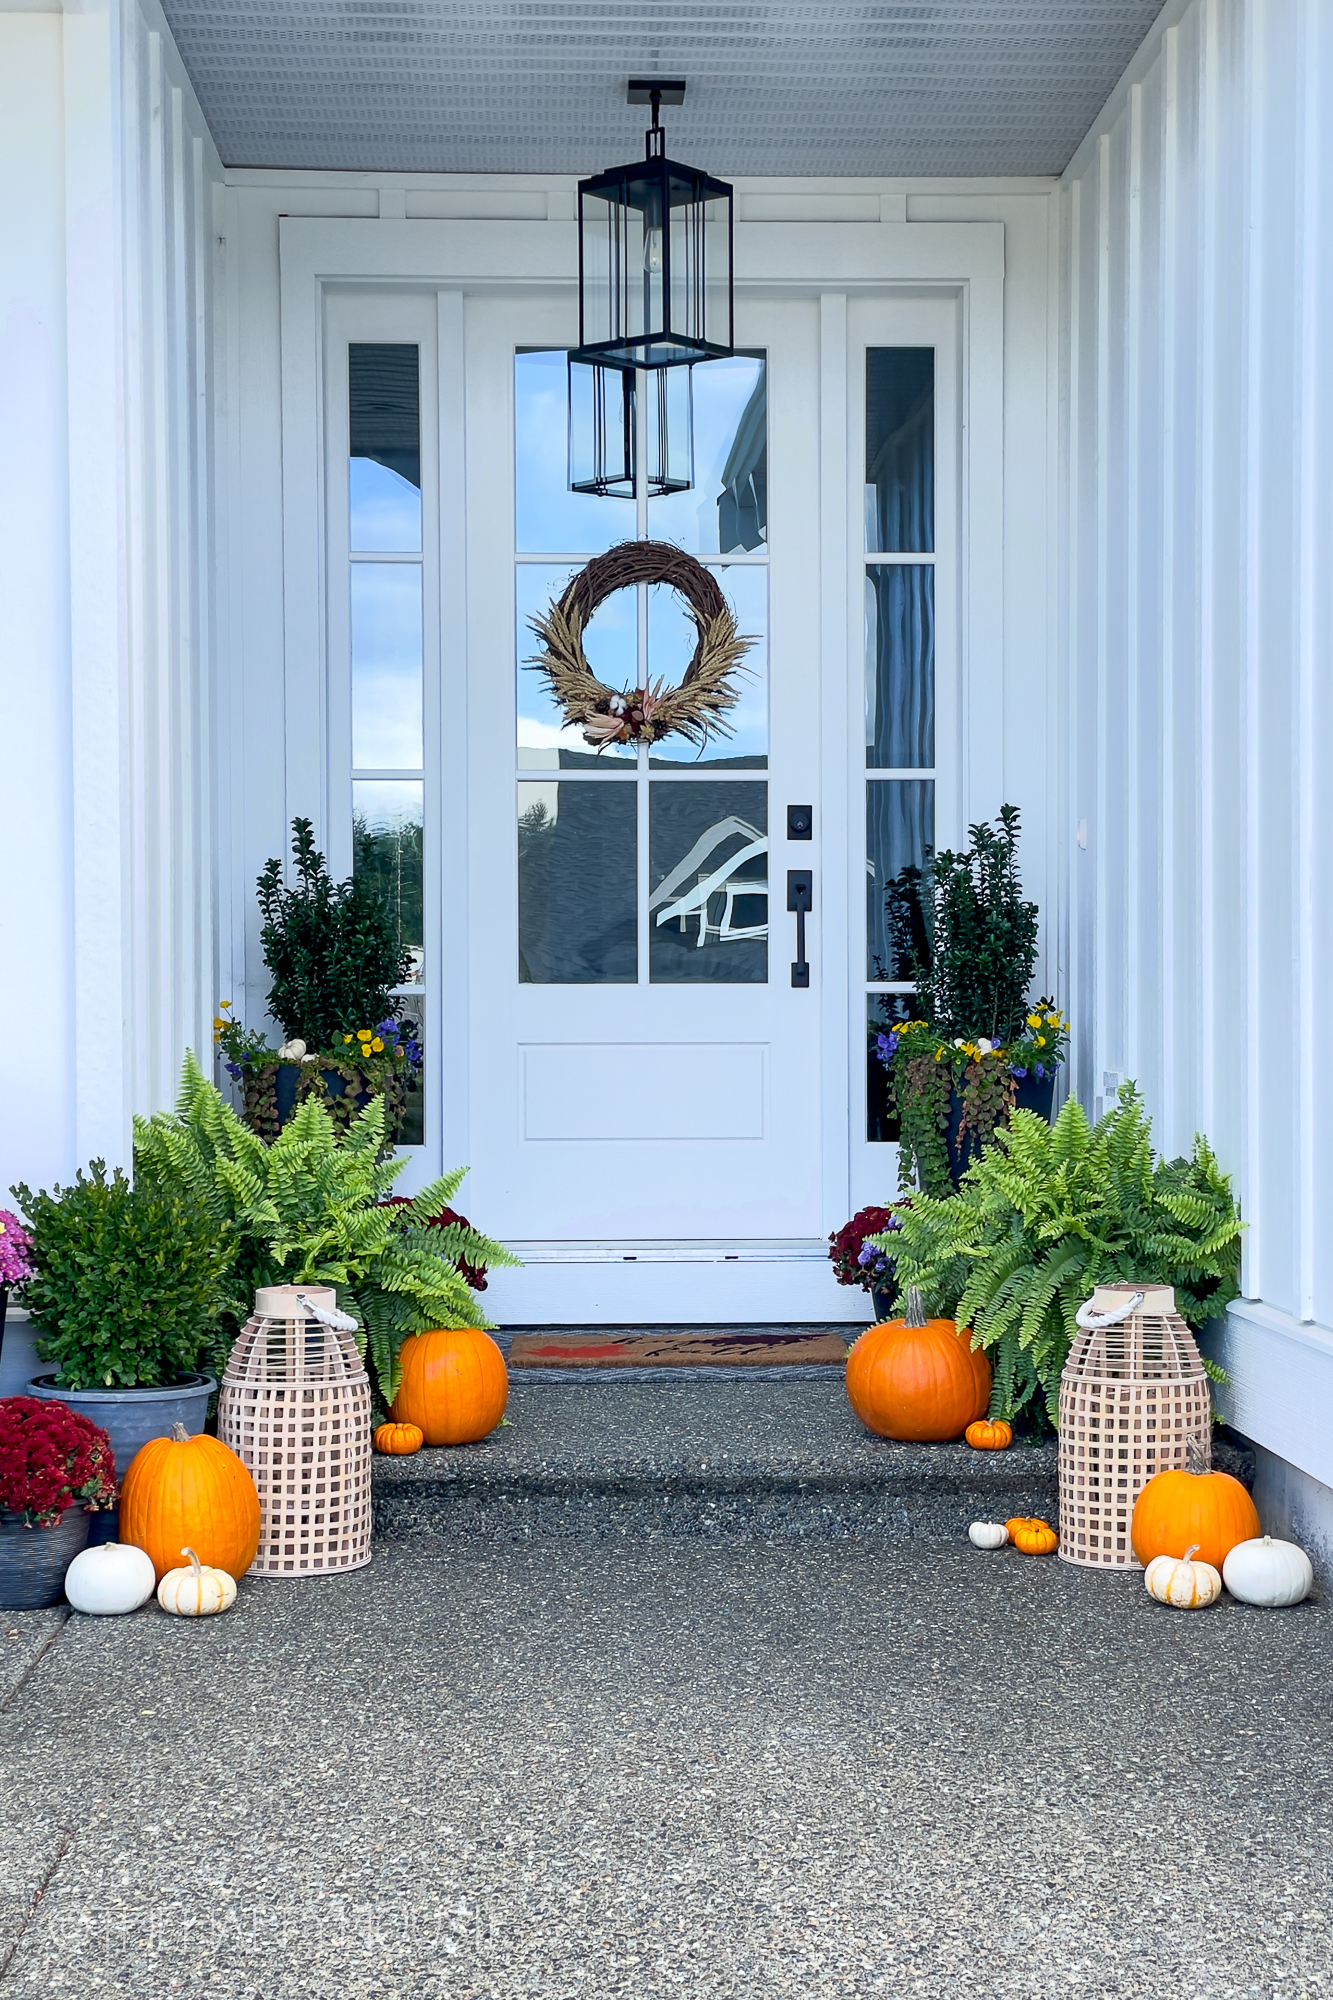 A small wreath is on the front door to the home.